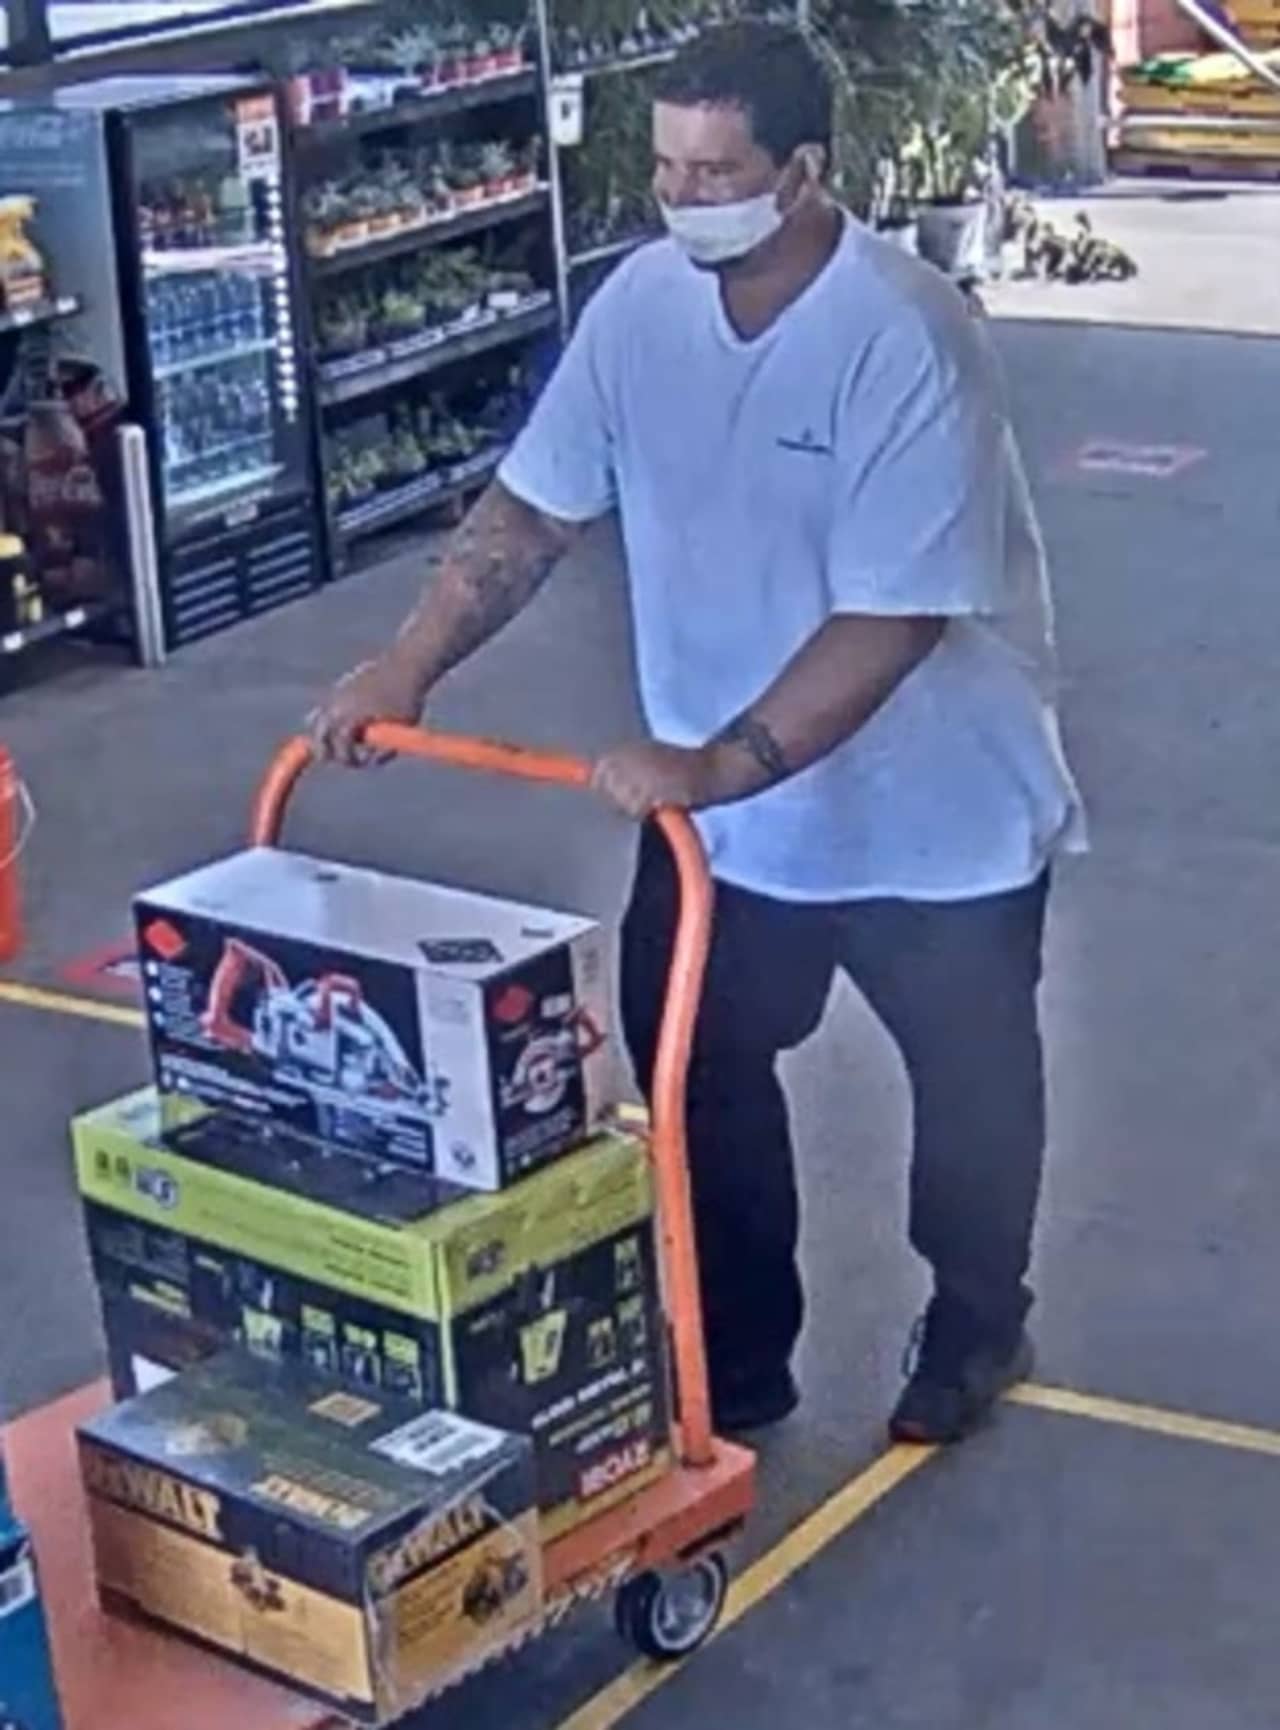 A man is wanted after allegedly stealing hundreds of dollars worth of merchandise from Home Depot in Shirley.